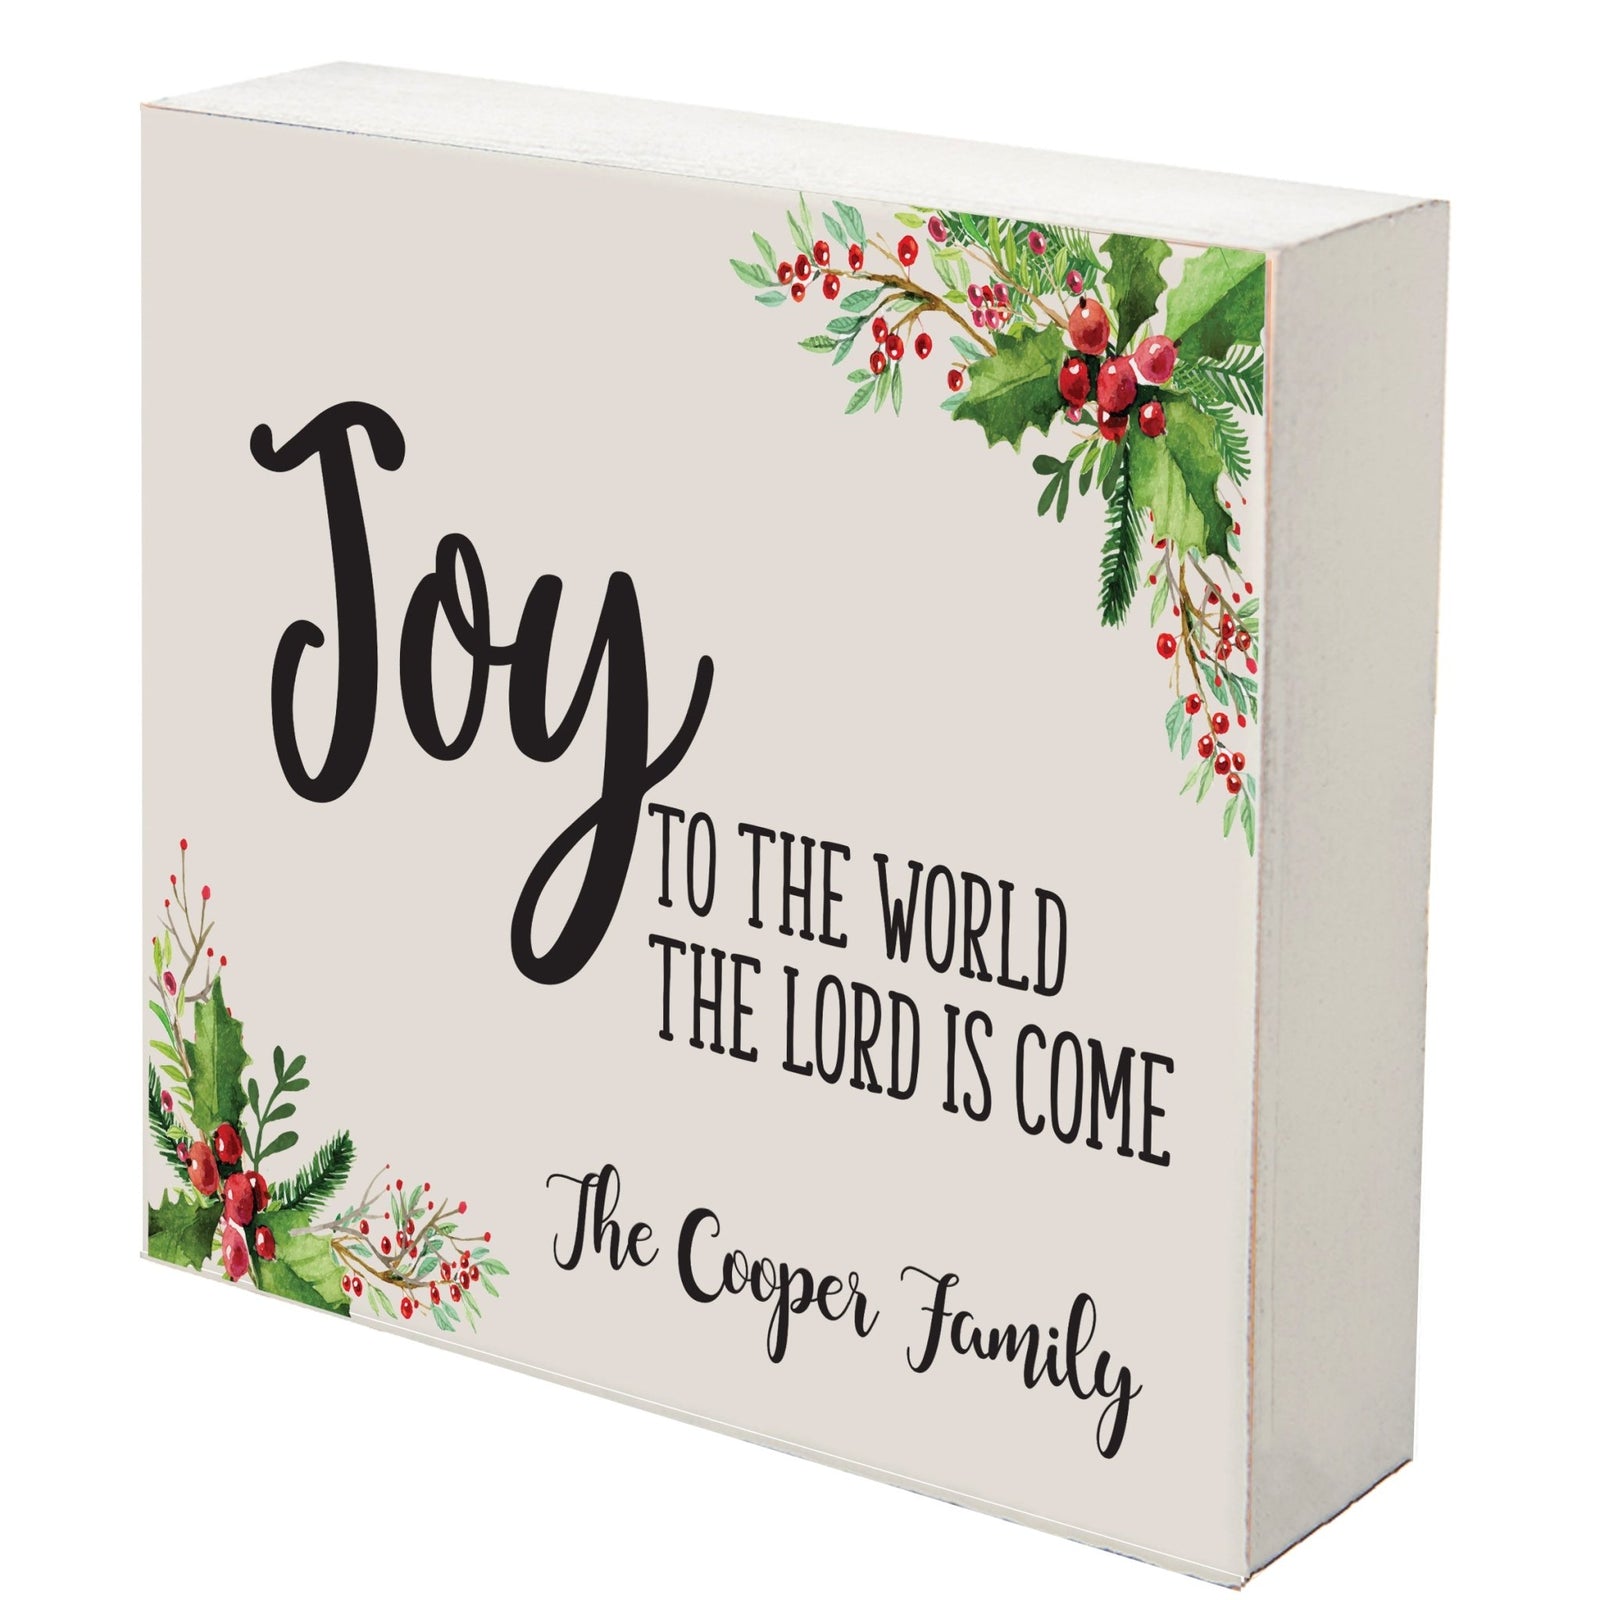 Personalized Merry Christmas Shadow Box - Holly Joy To The World - LifeSong Milestones